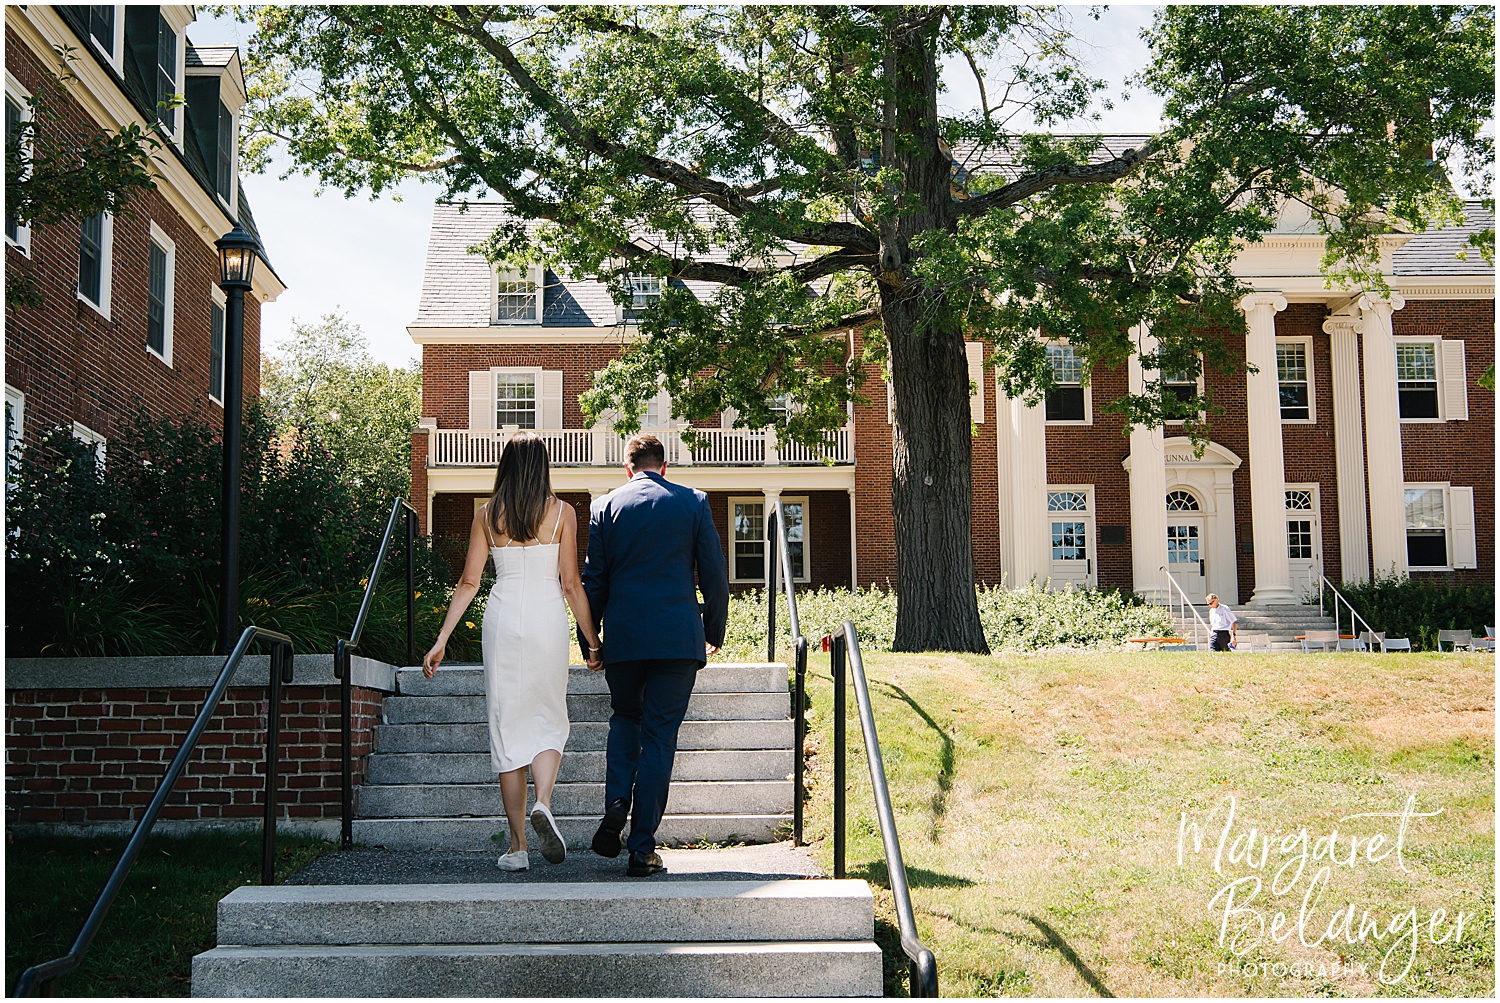 A bride and groom holding hands while walking up the steps towards a traditional brick building on a sunny day.